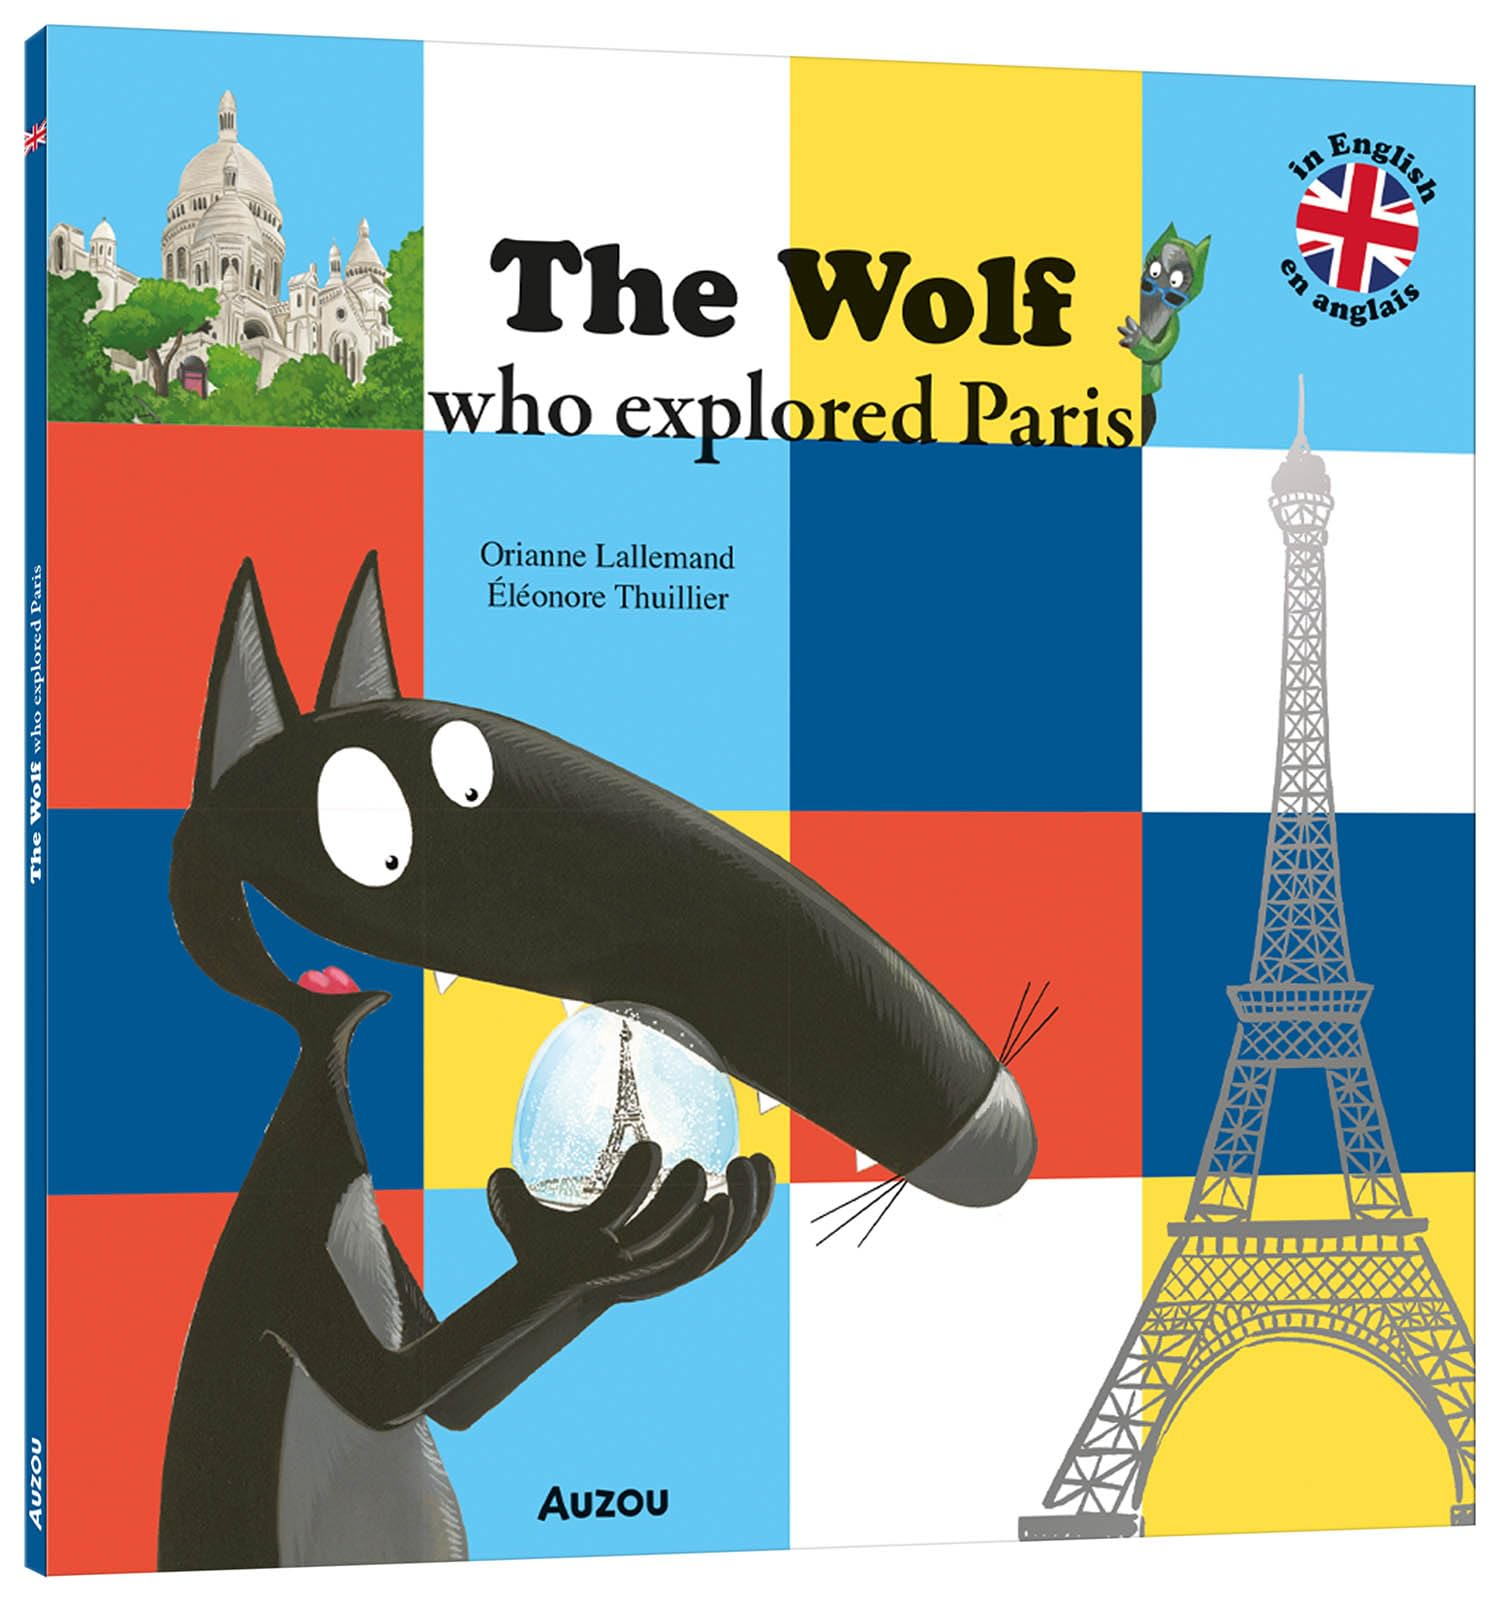 The wolf who explored Paris